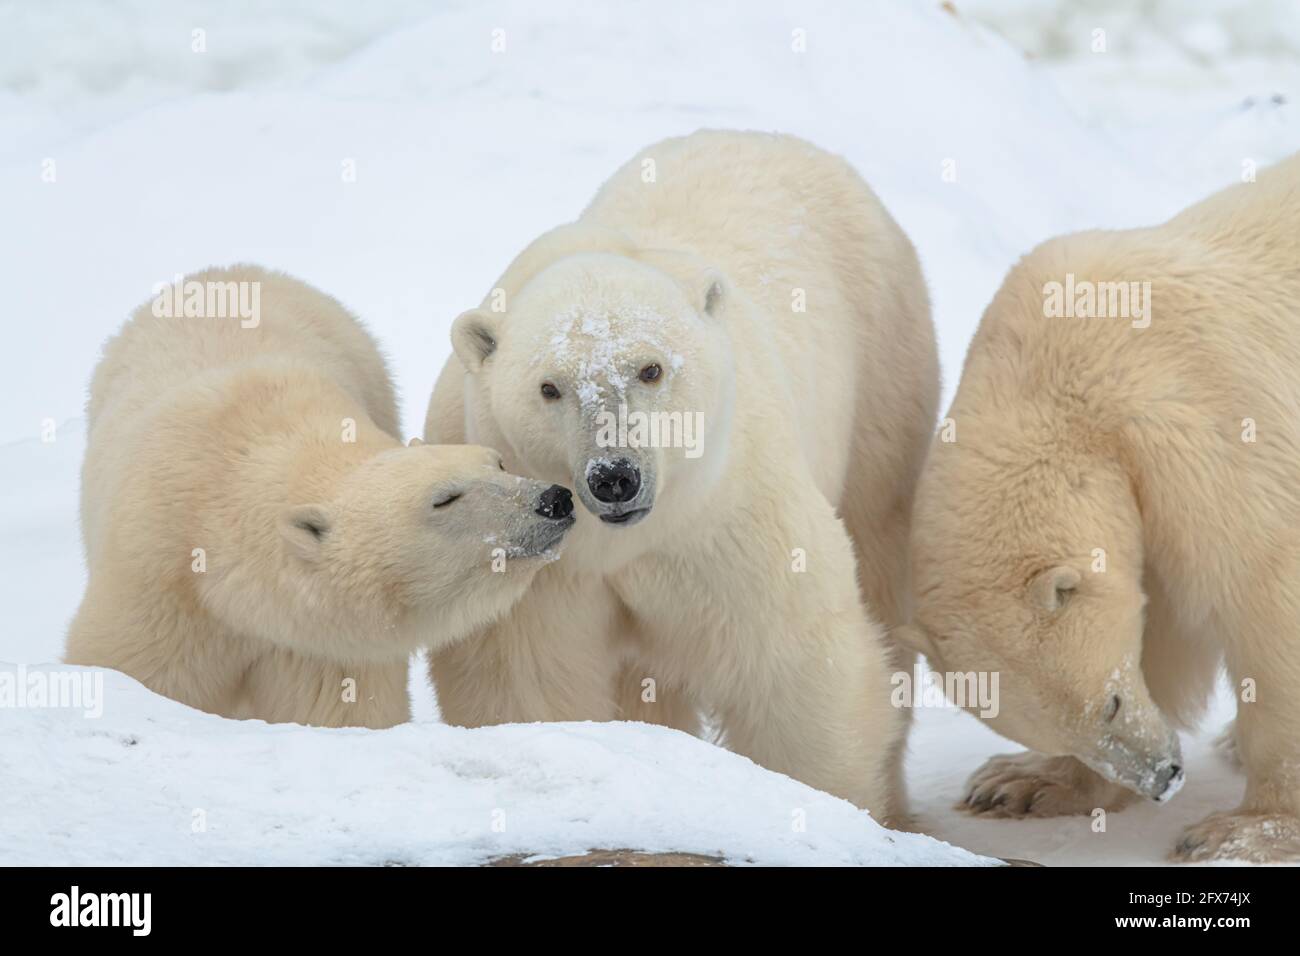 Three polar bears, mom and two cubs in shot with one young bear trying to lick its mothers mouth. Bear with tongue sticking out on white background. Stock Photo